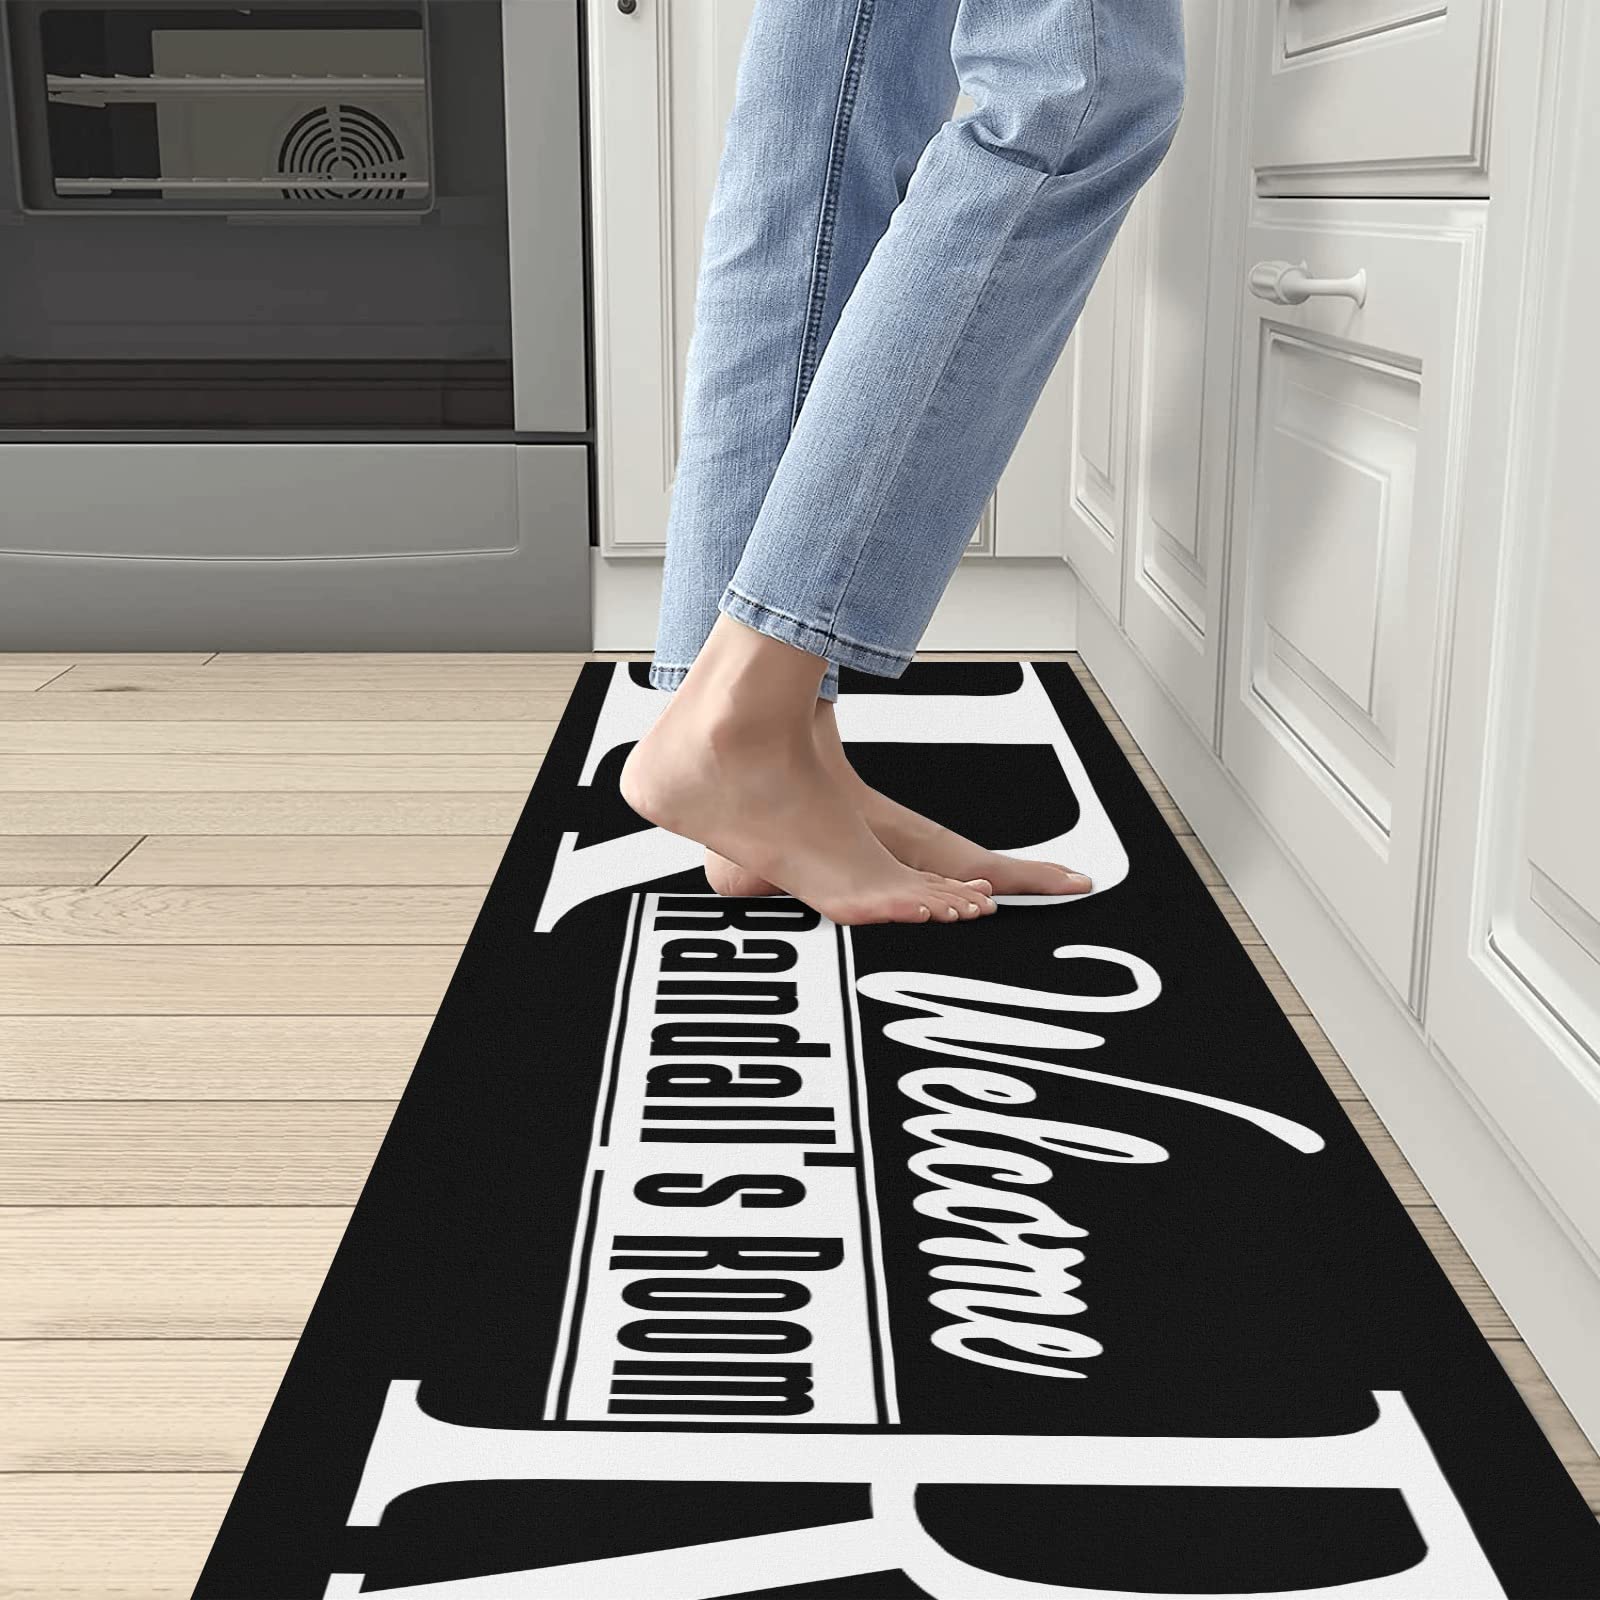 Custom Welcome Room Black White Kitchen Mats with Name Text Non Slip Soft Rubber Doormats Runner Carpets Rugs for Bathroom Bedroom Laundry Decor 48x17 Inch